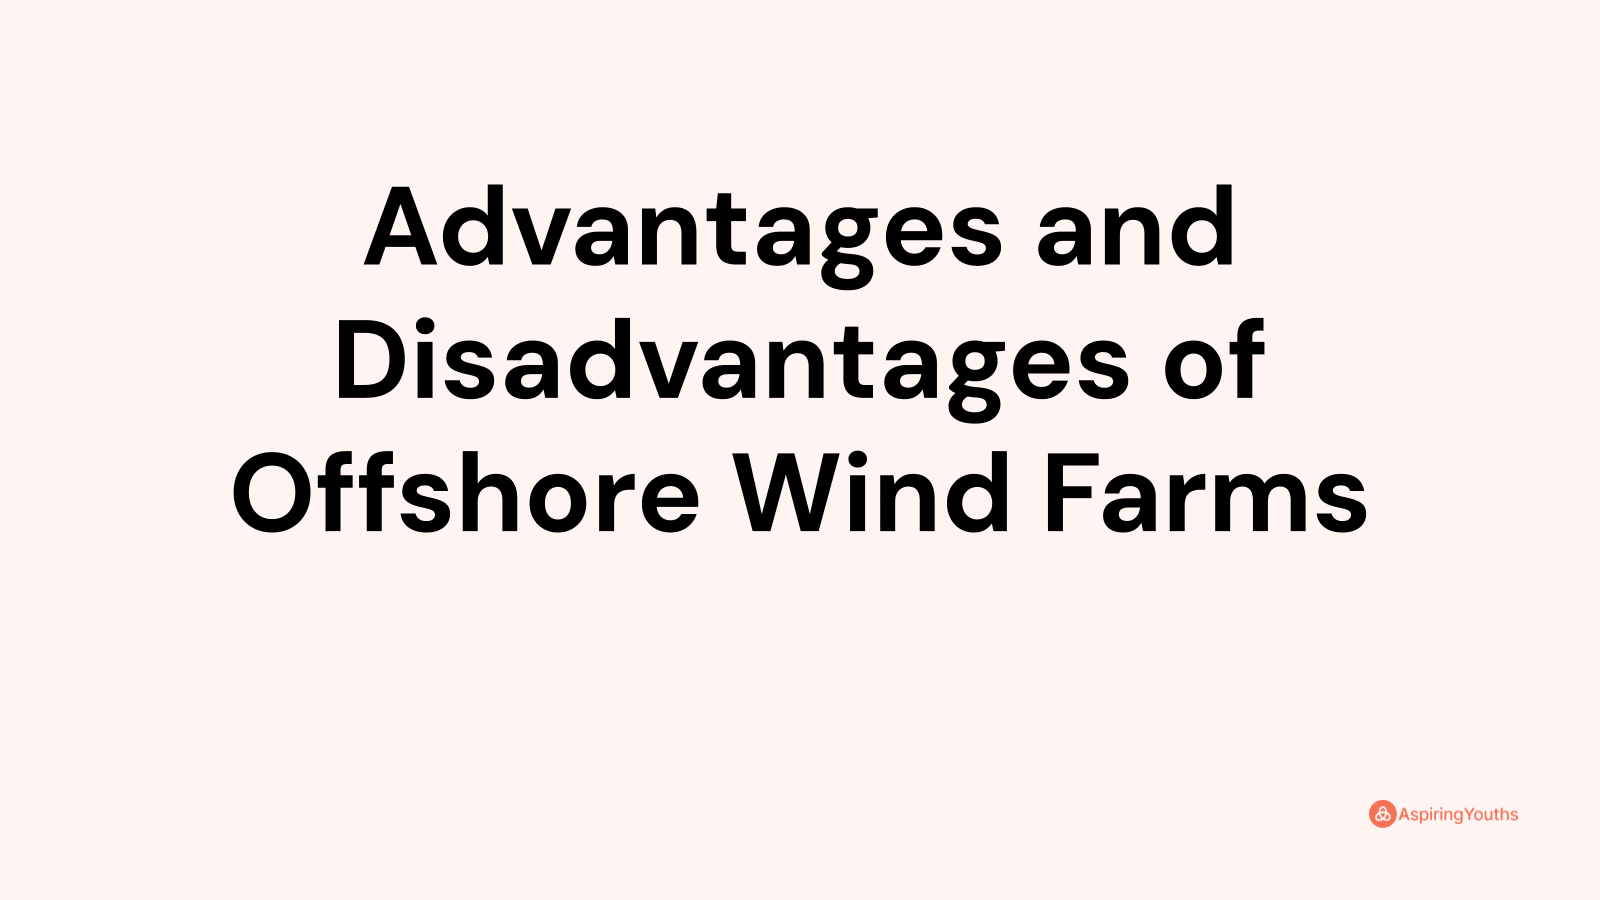 Advantages and disadvantages of Offshore Wind Farms